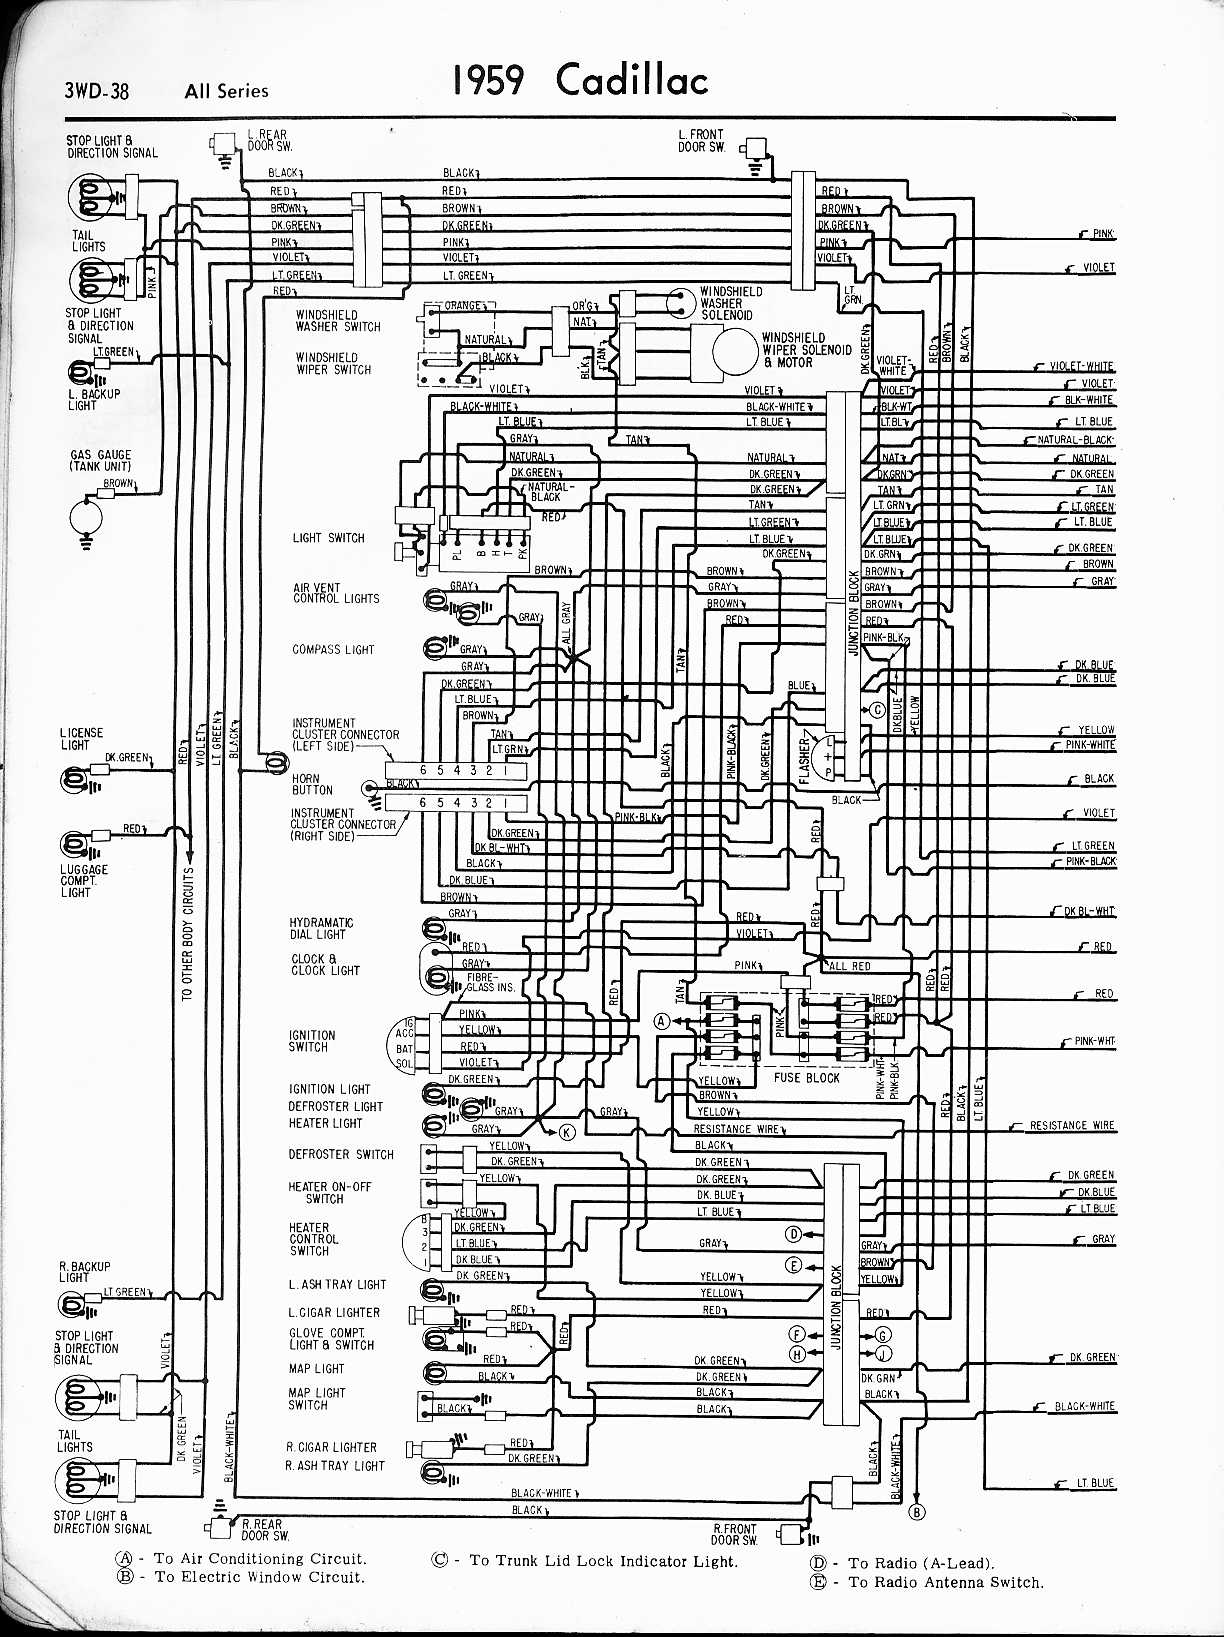 Cadillac Wiring Diagrams: 1957-1965 1951 chevy ignition switch wiring diagram 